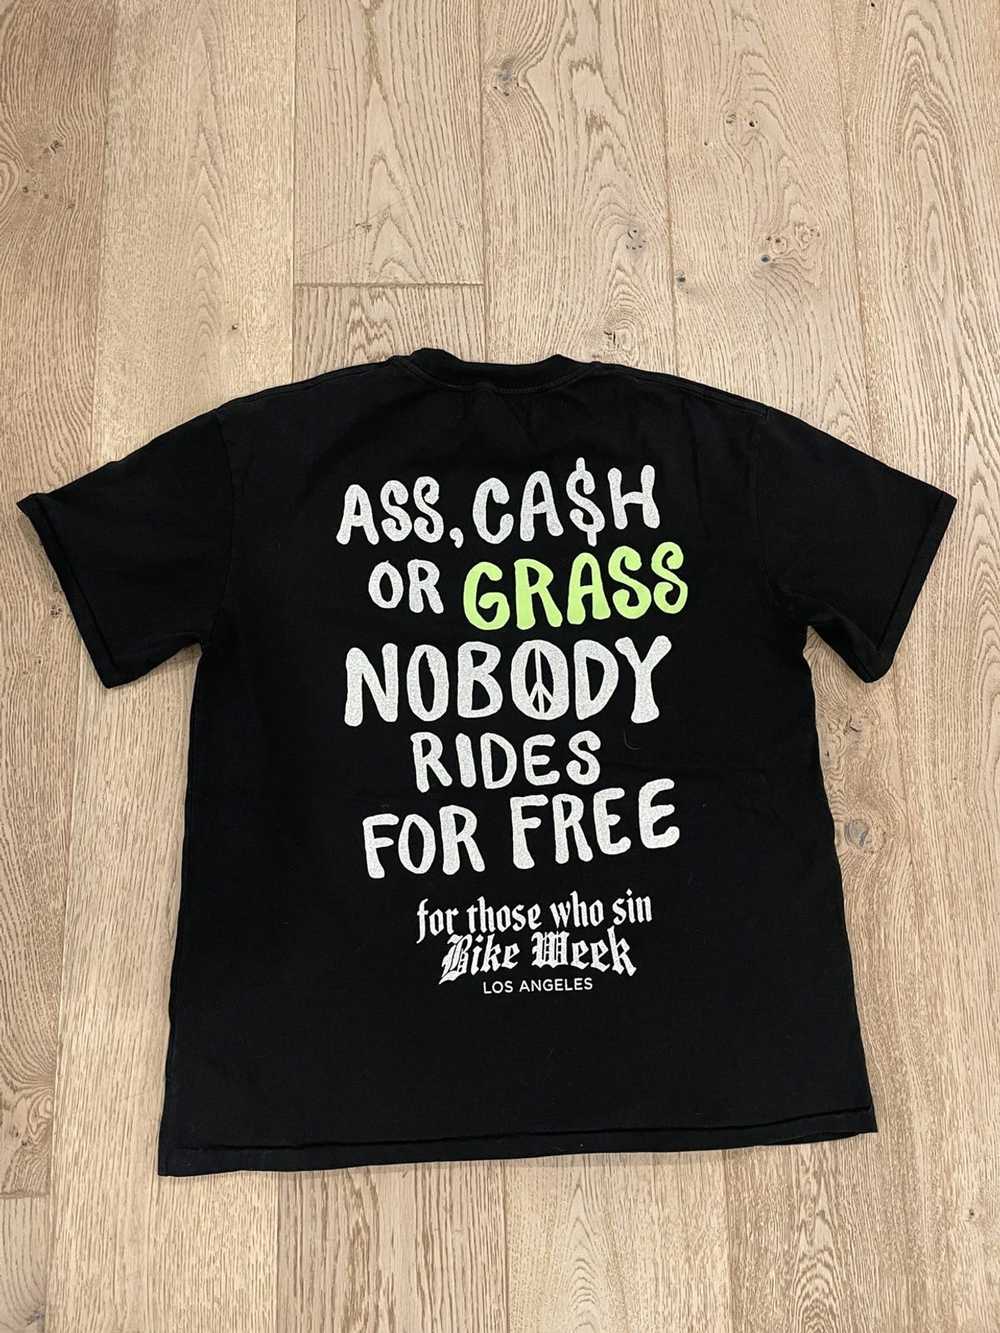 For those who sin ass cash or grass tee - image 1